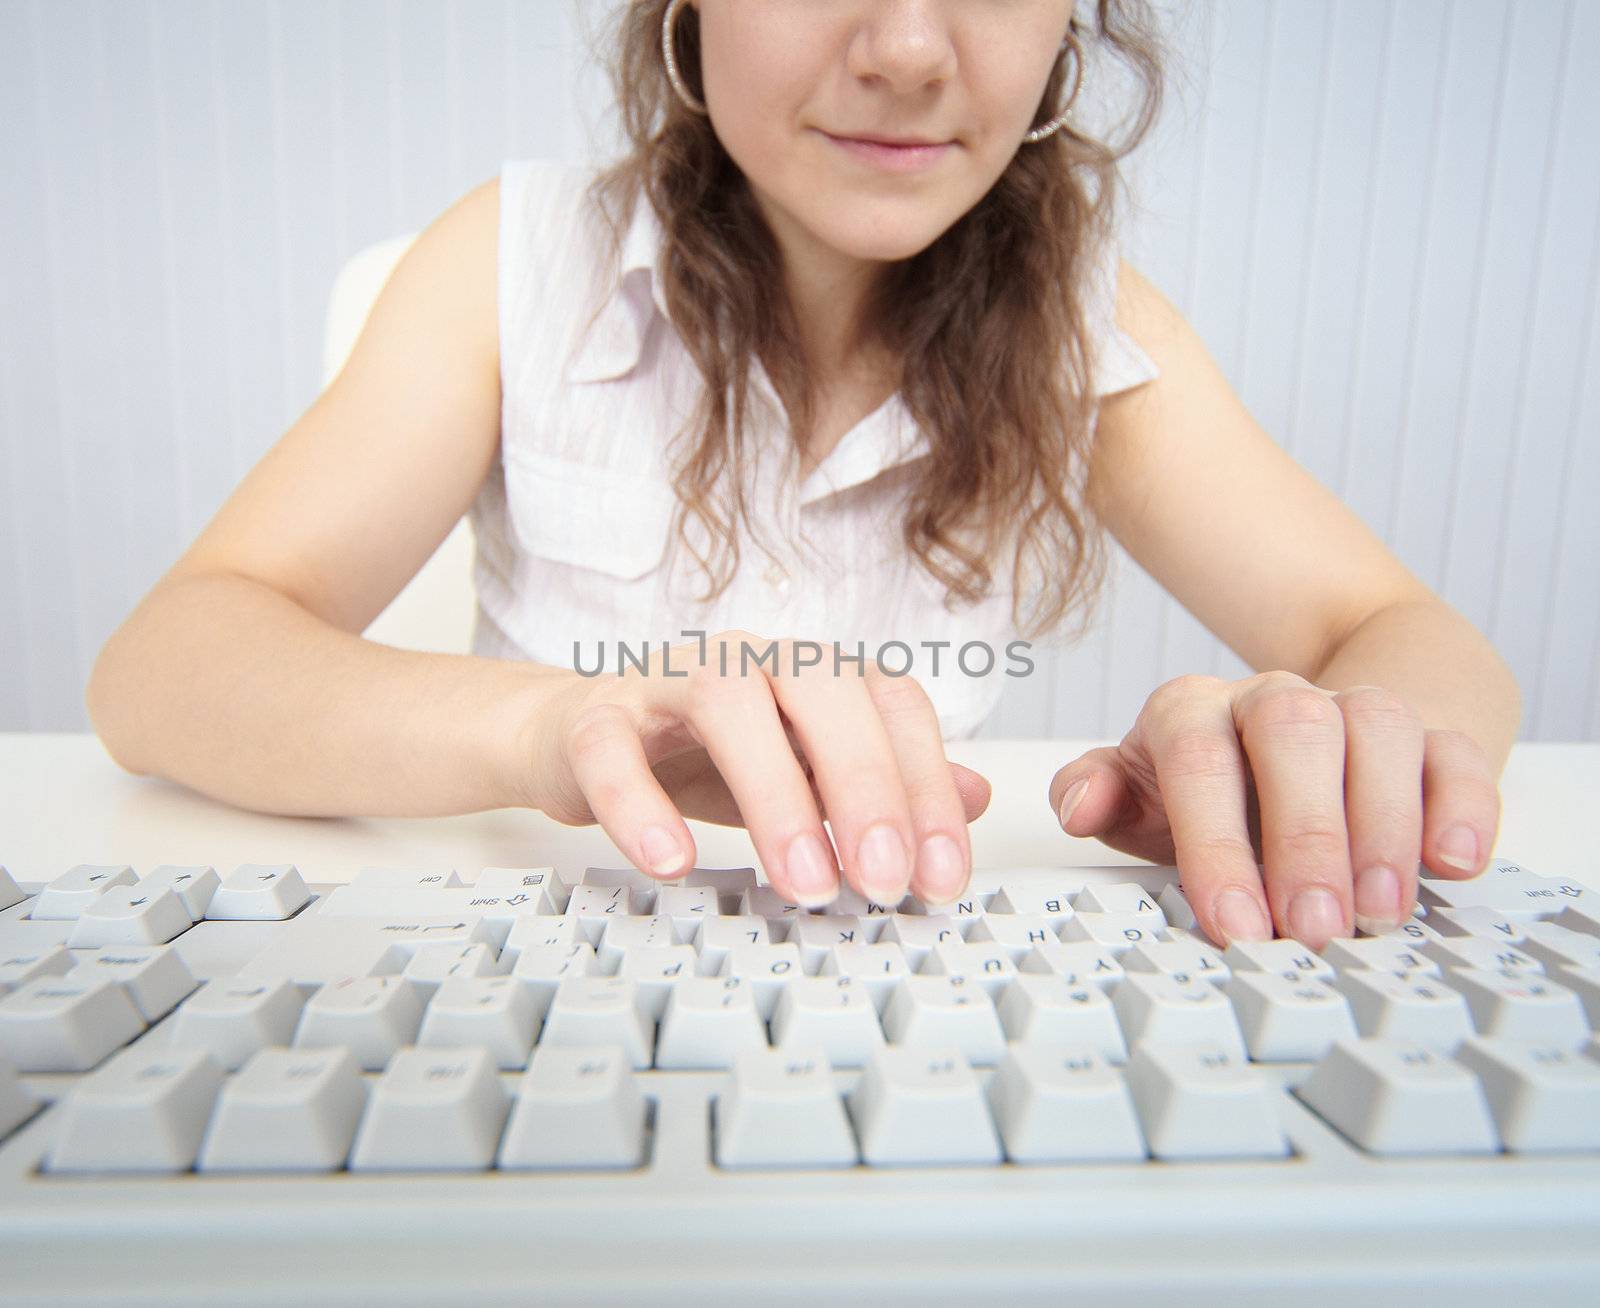 A woman working at a computer keyboard